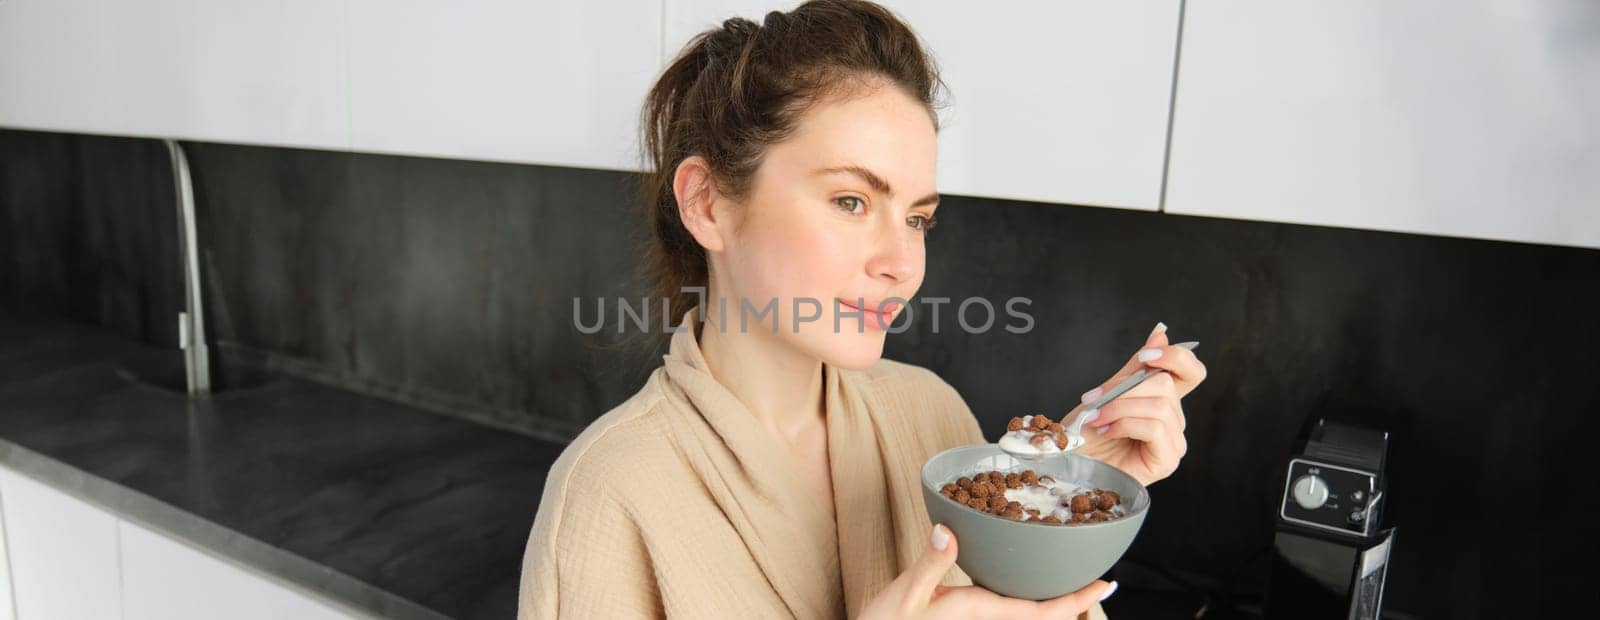 Good-looking brunette woman eating her breakfast, standing in kitchen near worktop and holding bowl of cereals with milk, enjoying her morning, wearing cosy bathrobe.